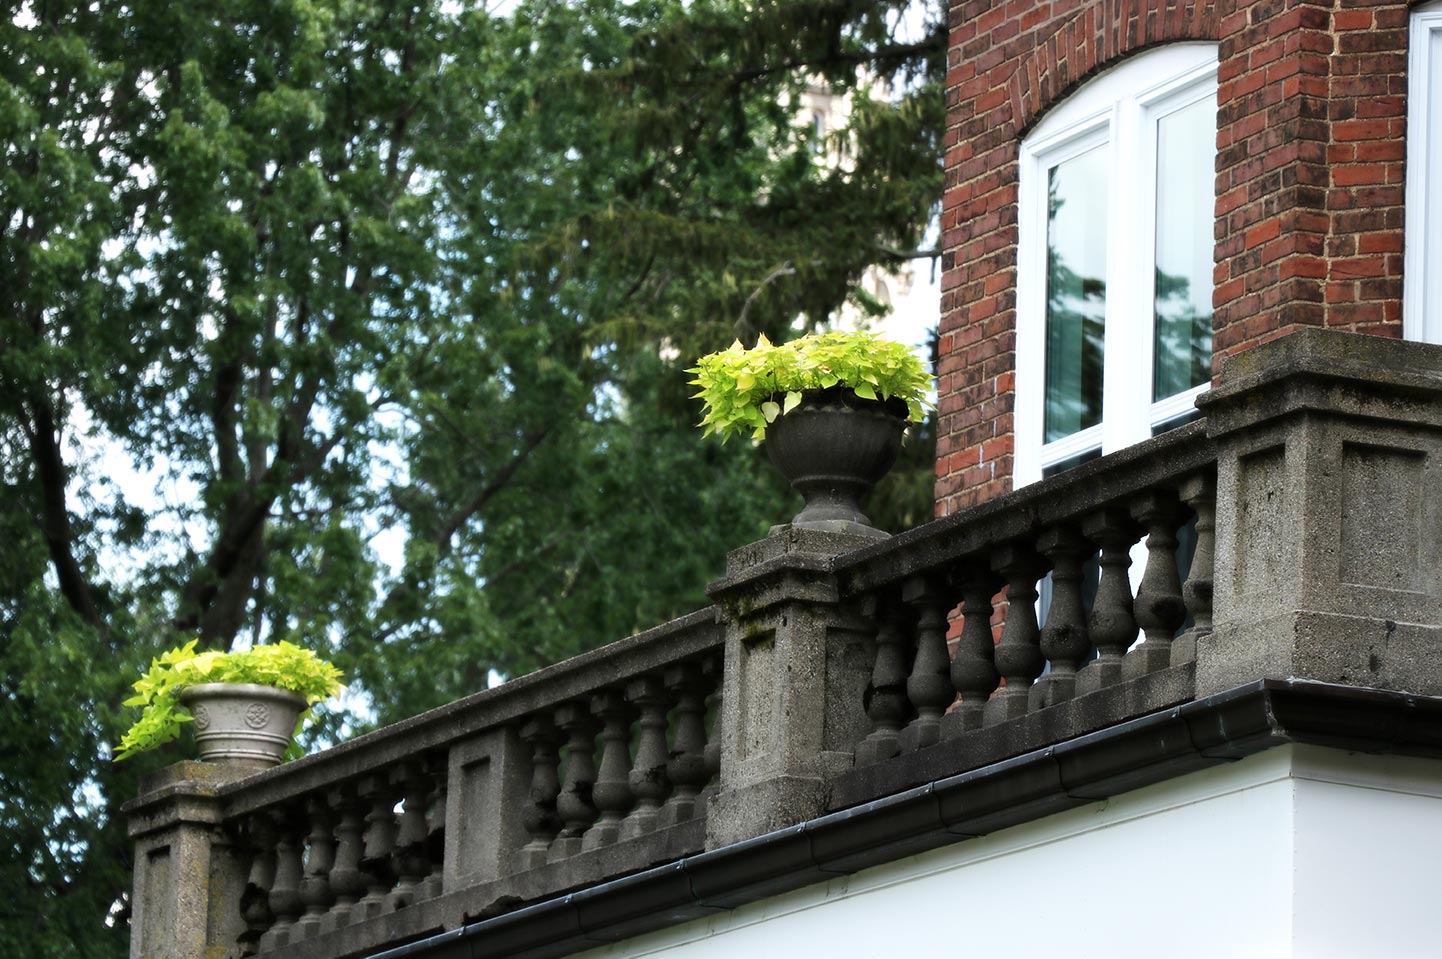 Detailed view of the upper porch spindles